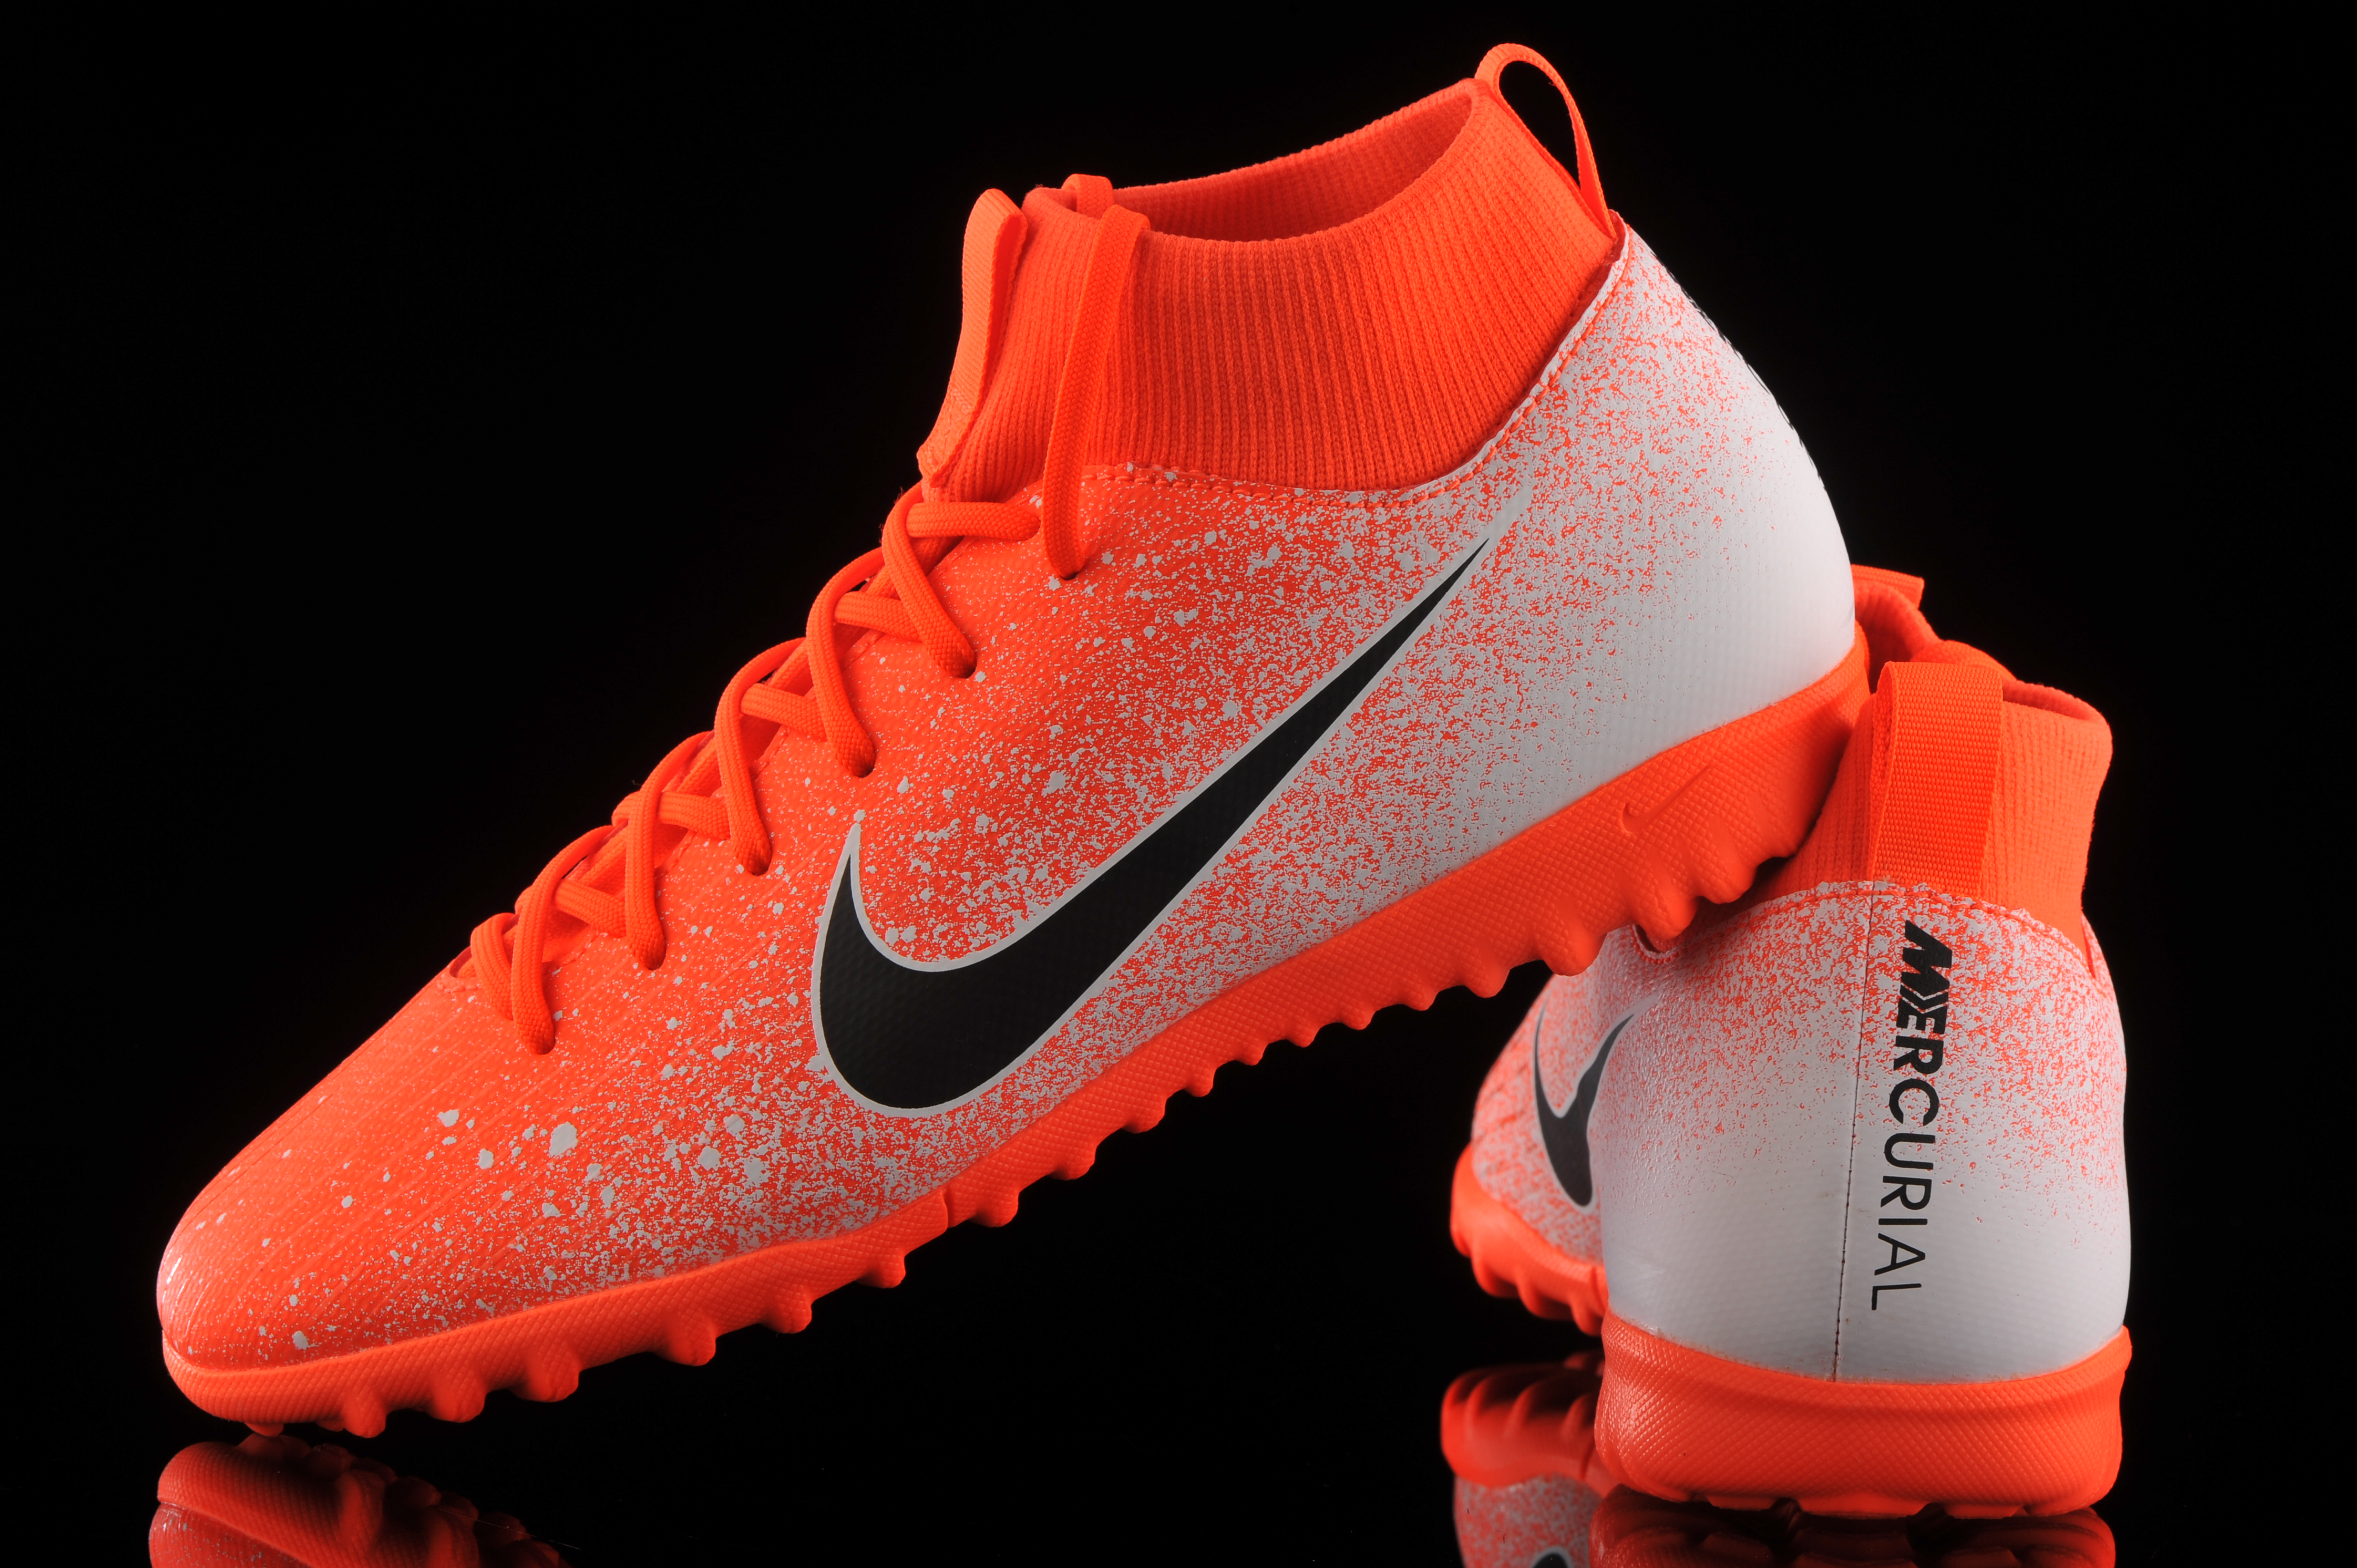 Soccer shoes Nike Mercurial Superfly VI Academy SG Pro.